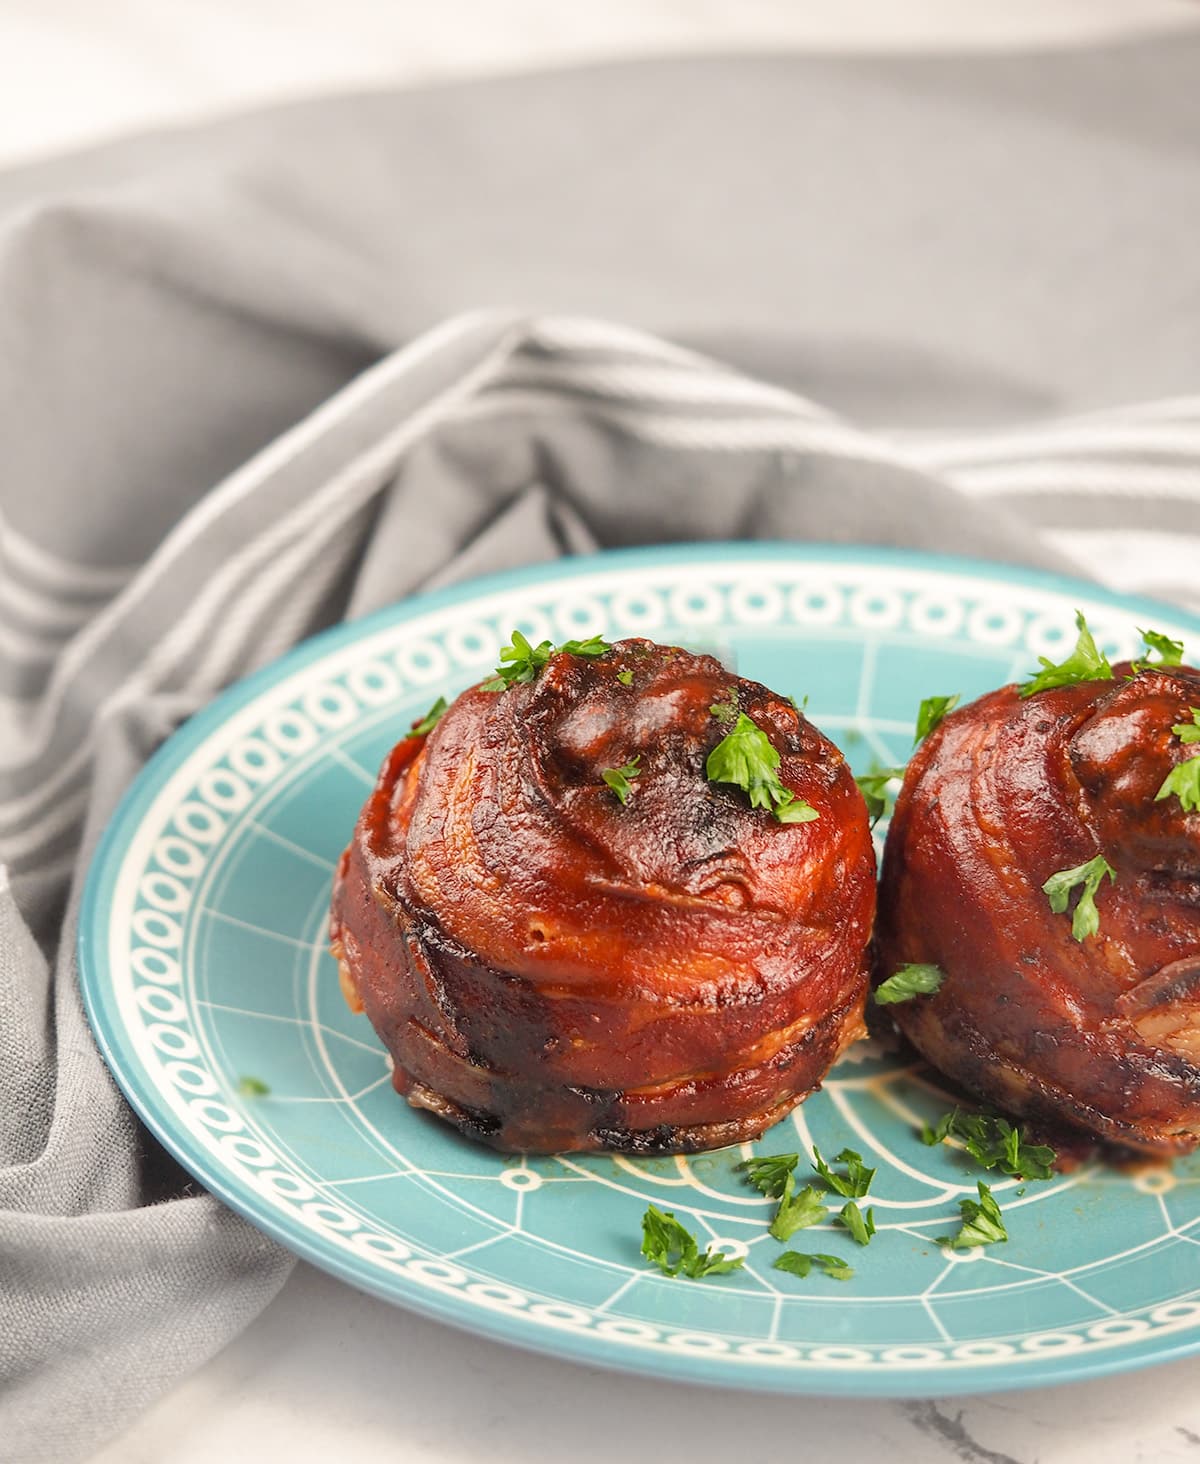 bacon wrapped onion bombs on blue plate next to grey striped linen towel